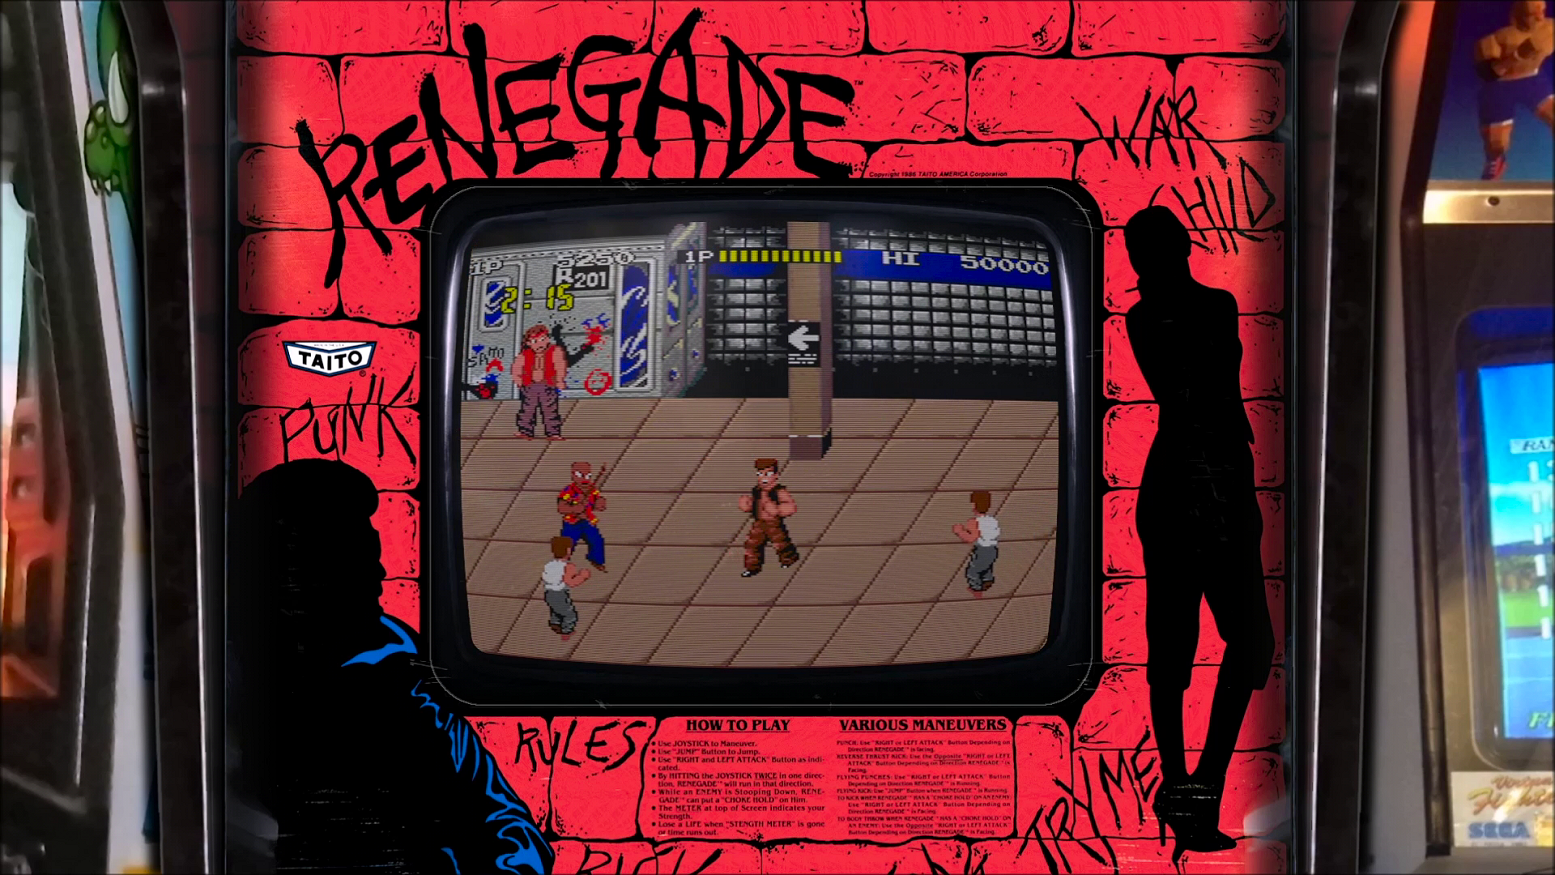 Orionsangel S Realistic Arcade Overlays For Mame Retroarch Updated 04 27 2021 Page 13 Game Media Launchbox Community Forums